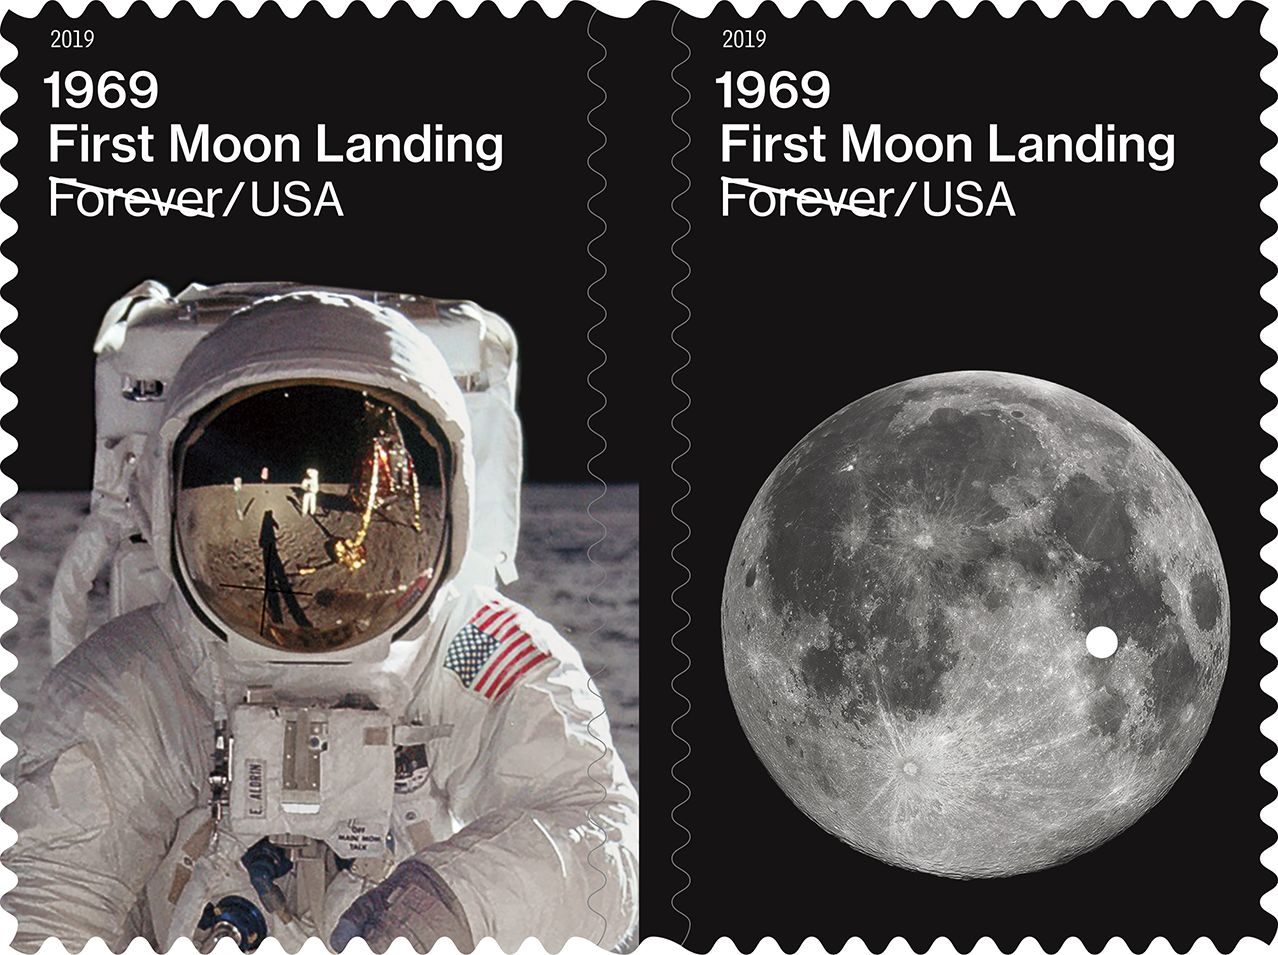 1969 First Moon Landing Forever stamps